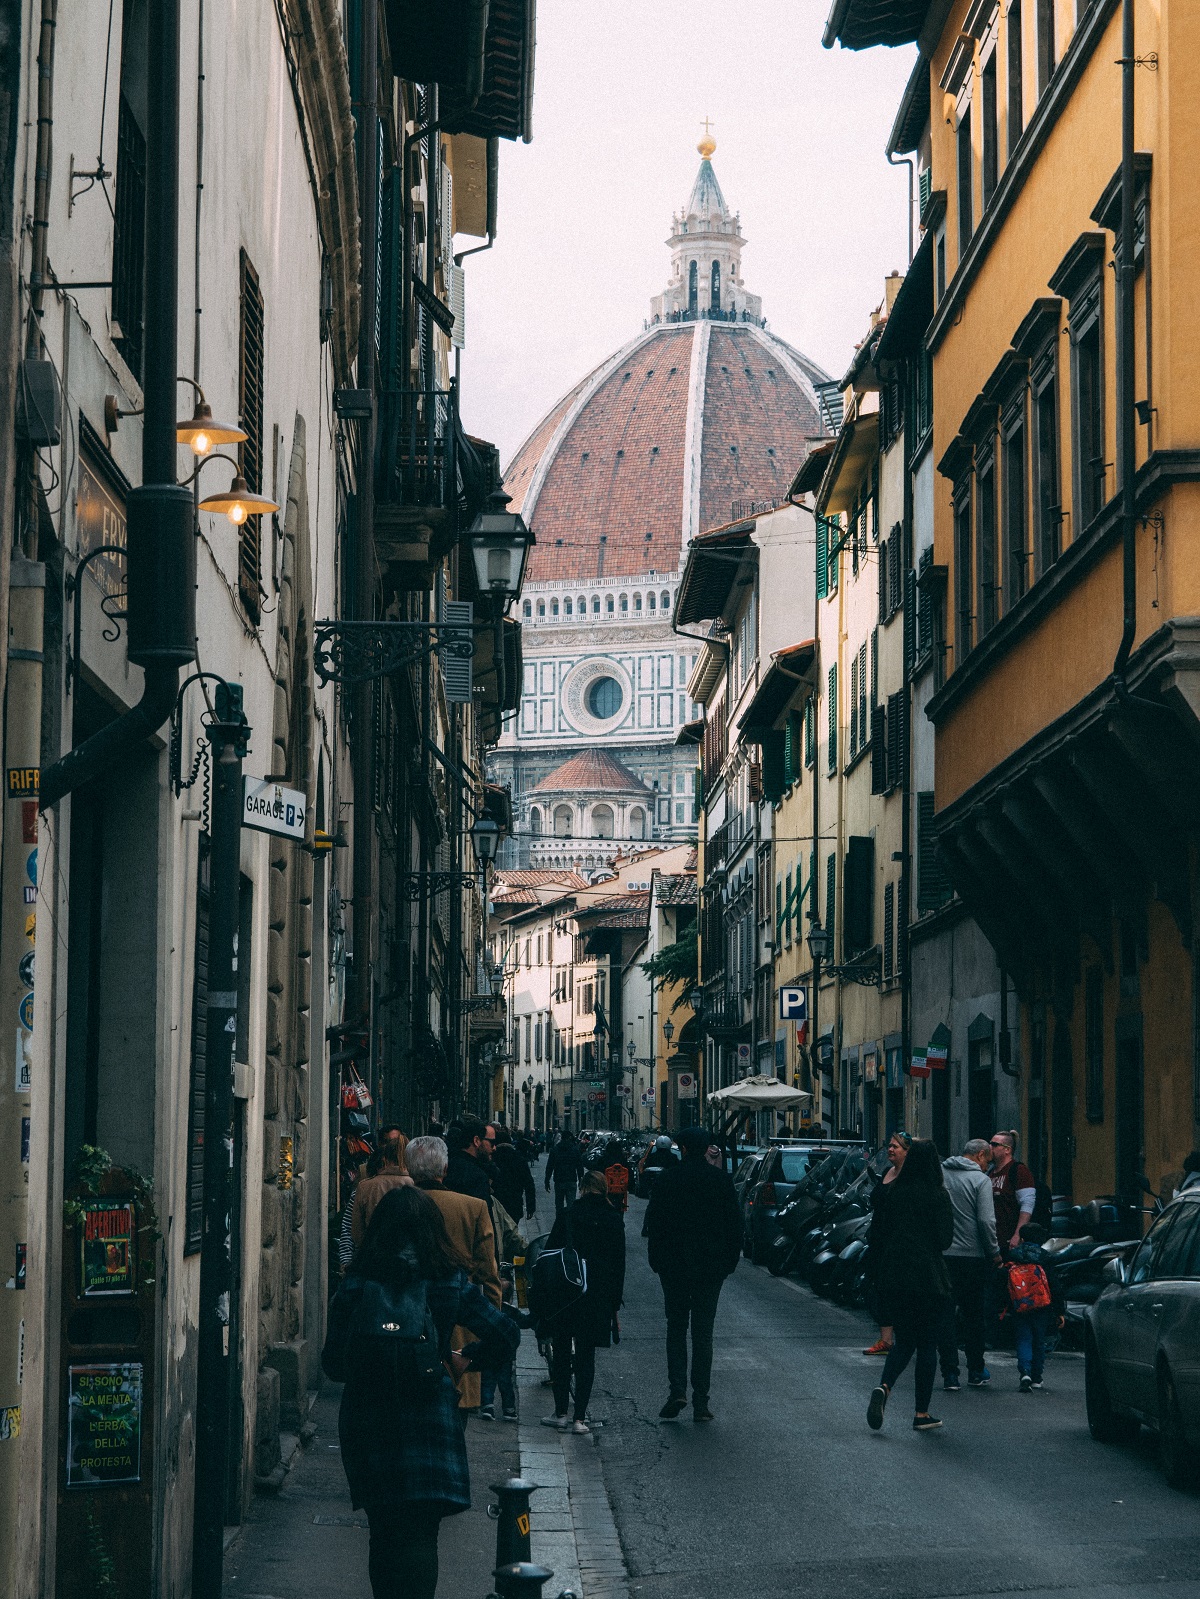 Crowded street in Florence with the duomo in the background